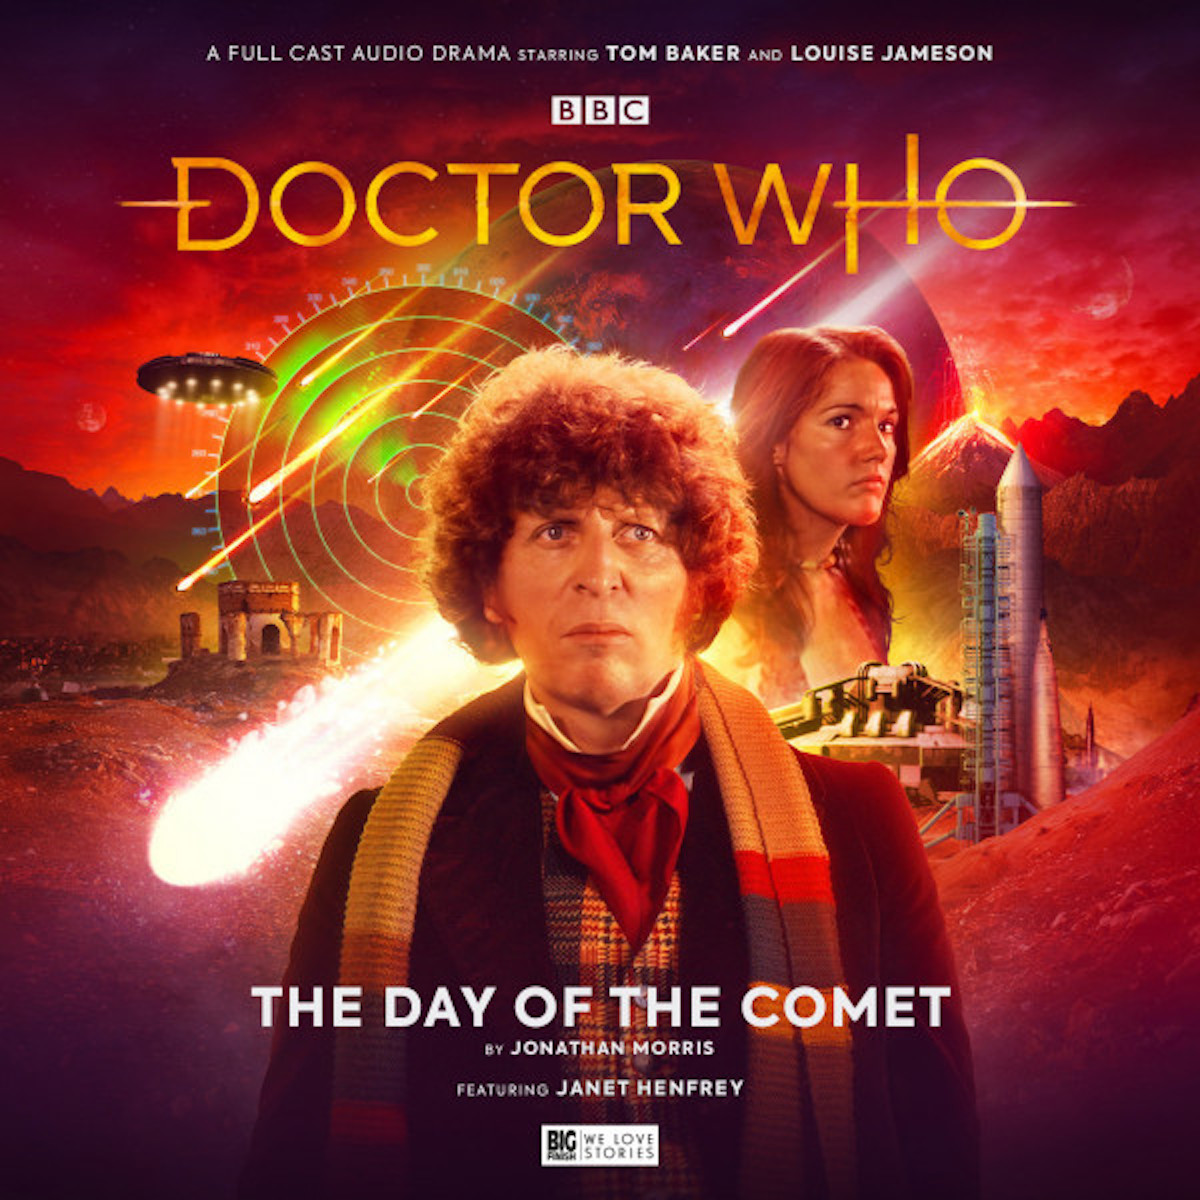 The Day of the Comet